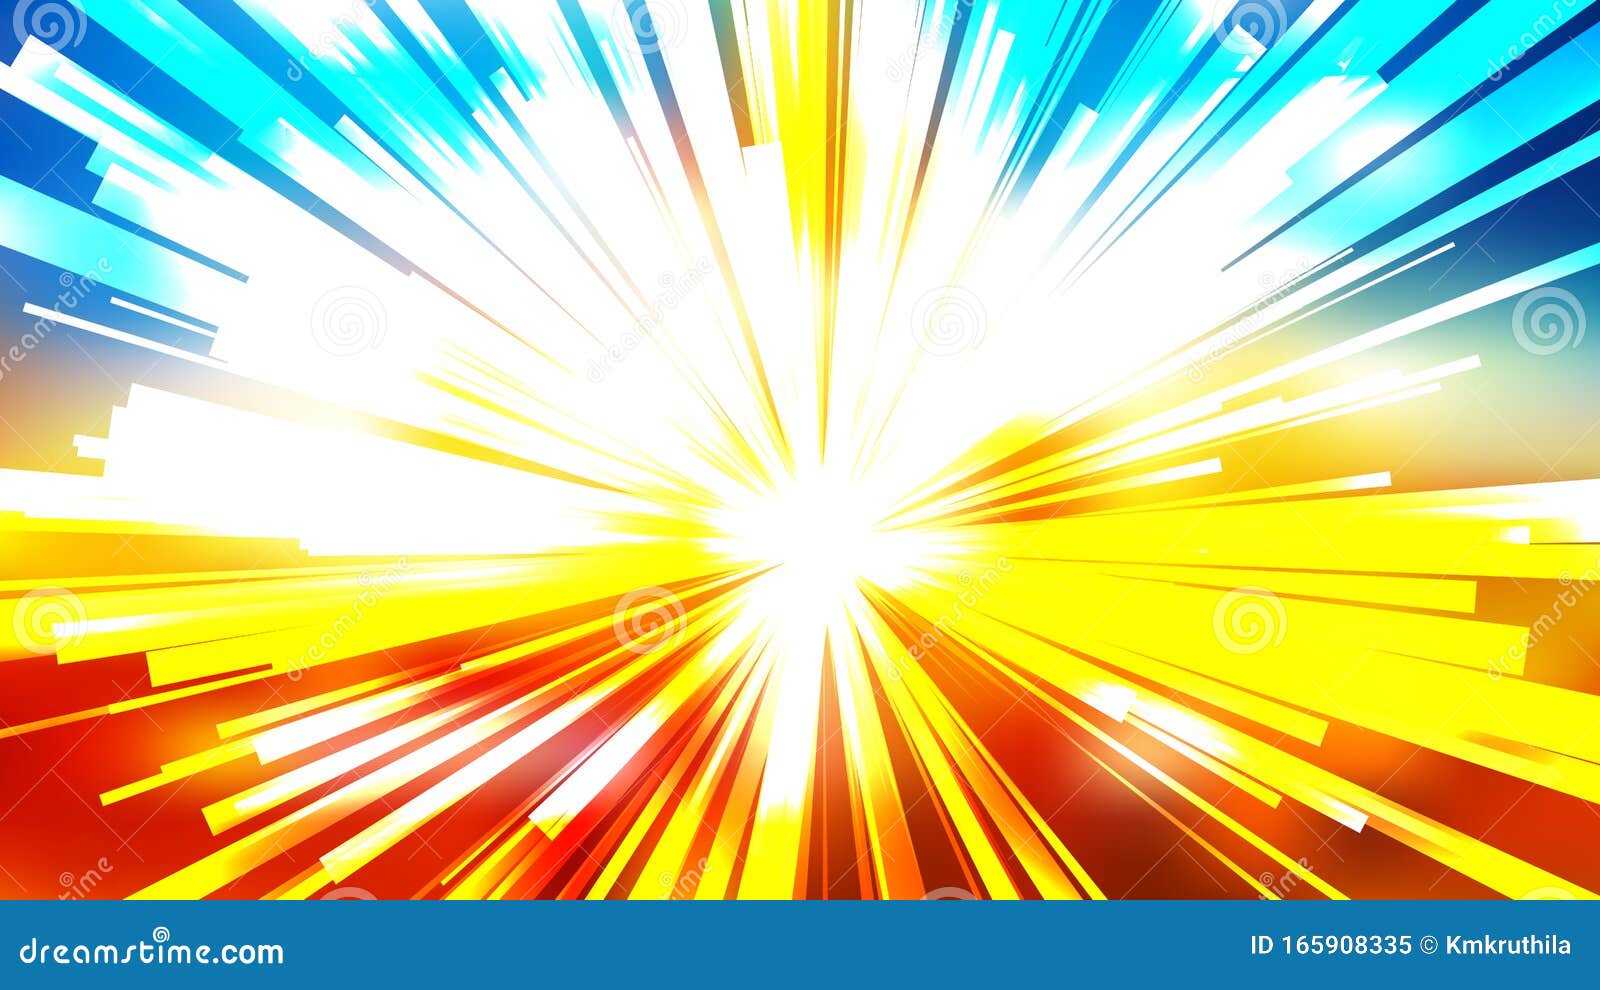 Abstract Red Yellow and Blue Radial Lights Background Stock Vector -  Illustration of radial, background: 165908335